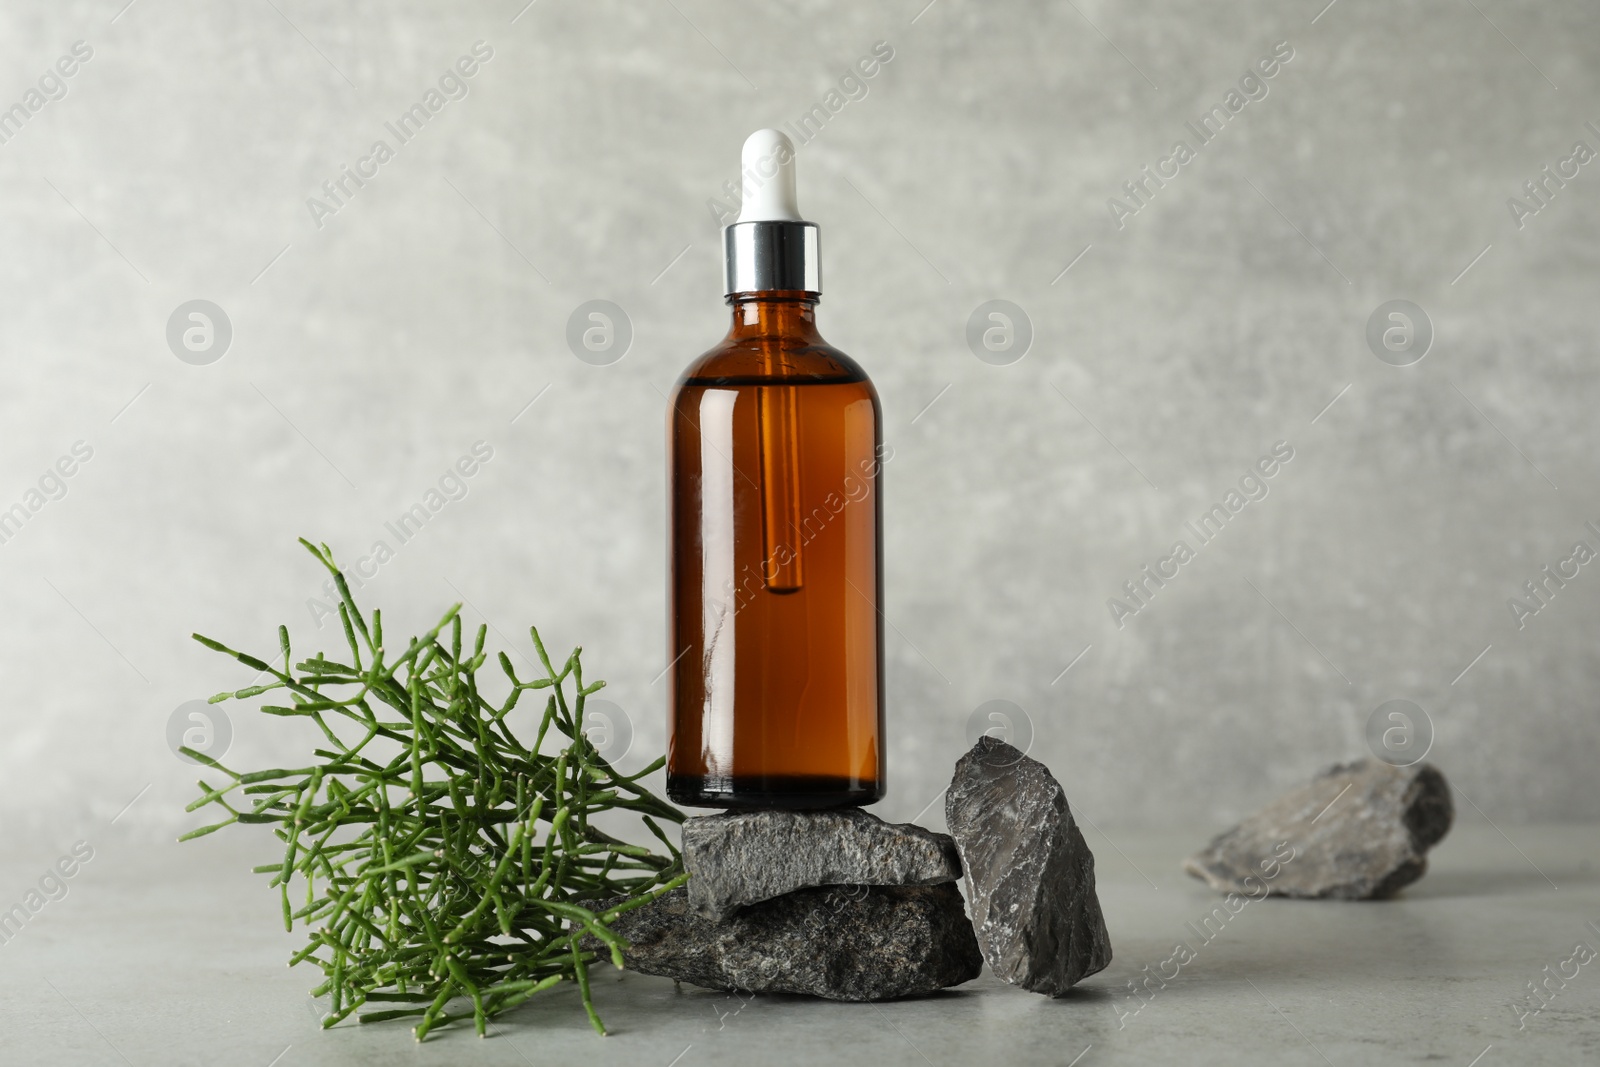 Photo of Bottle of hydrophilic oil, rocks and green plant on light grey table